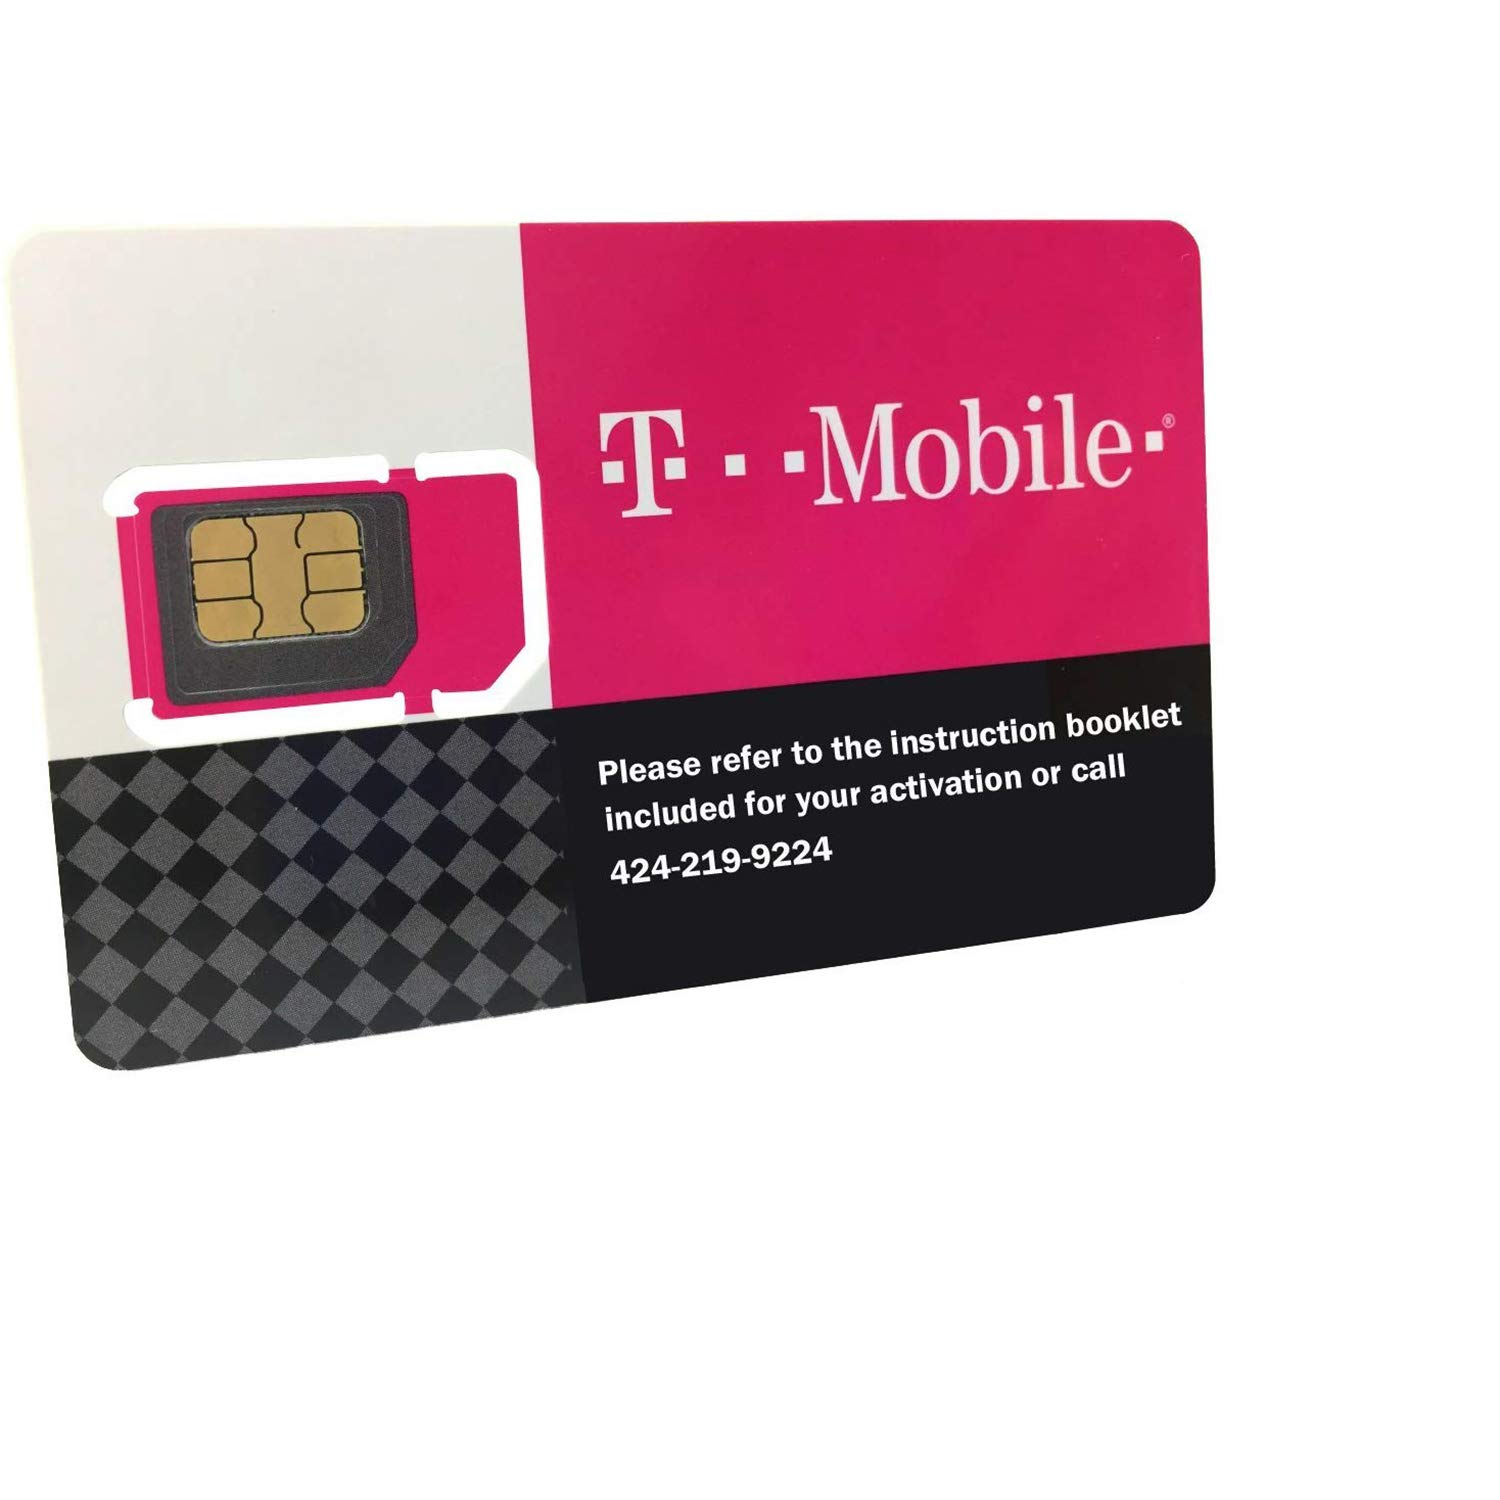 T-Mobile Prepaid SIM Card Unlimited Talk, Text, and Data in USA for 7 Days